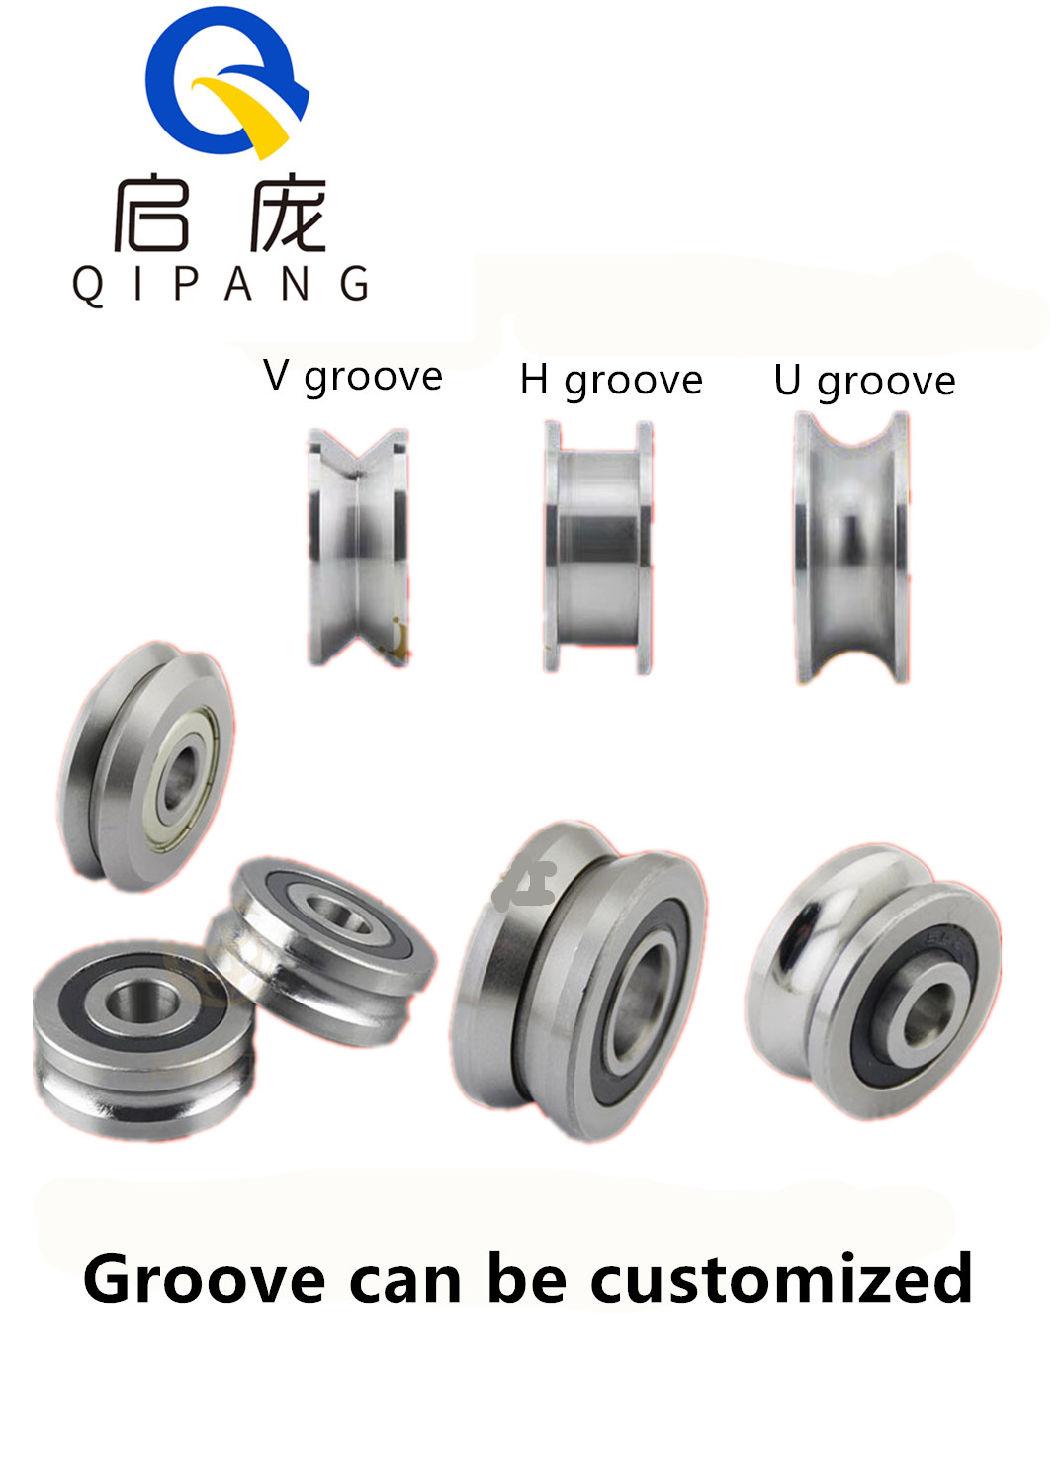 High Accuracy and Precision Wheel Bearings with Vgrooves